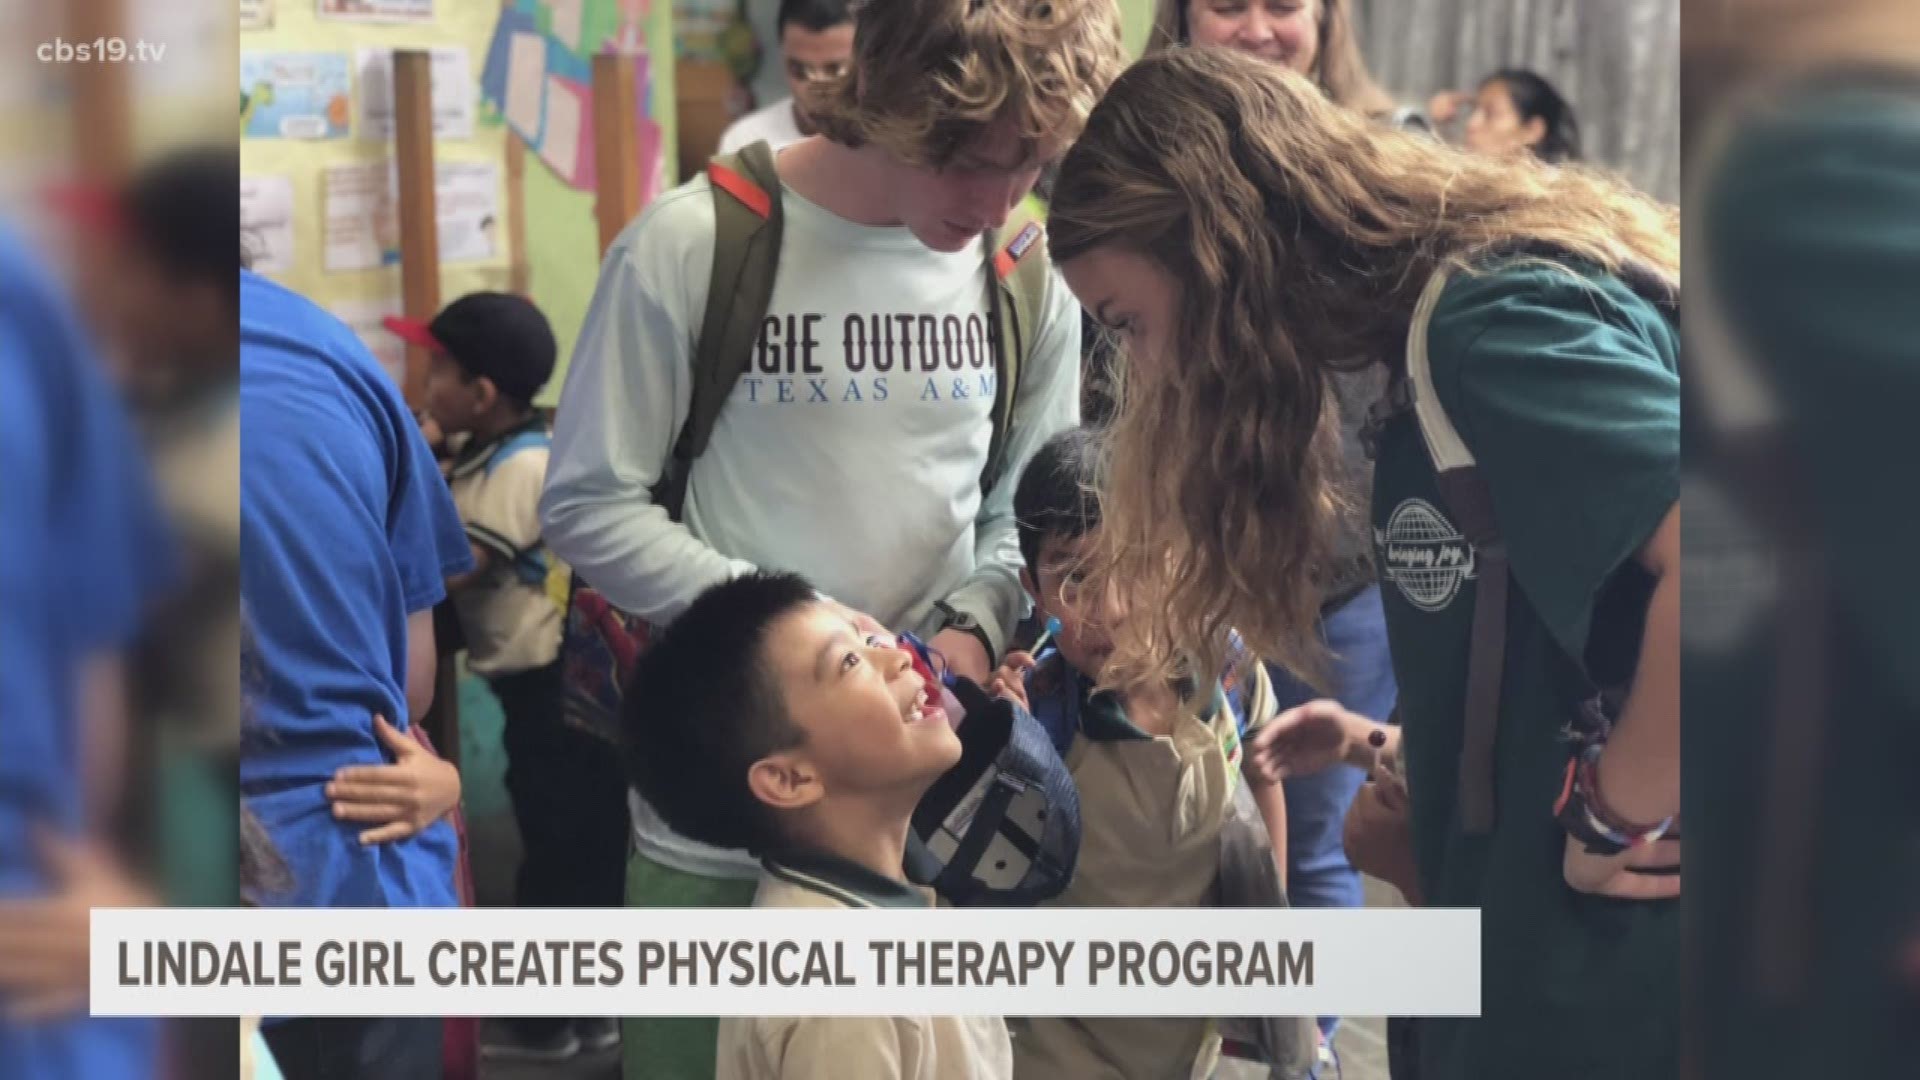 Abbey Van Andel wants to become a physical therapist when she grows up, she also loves helping people. So she decided why wait until she's older to start making a difference.